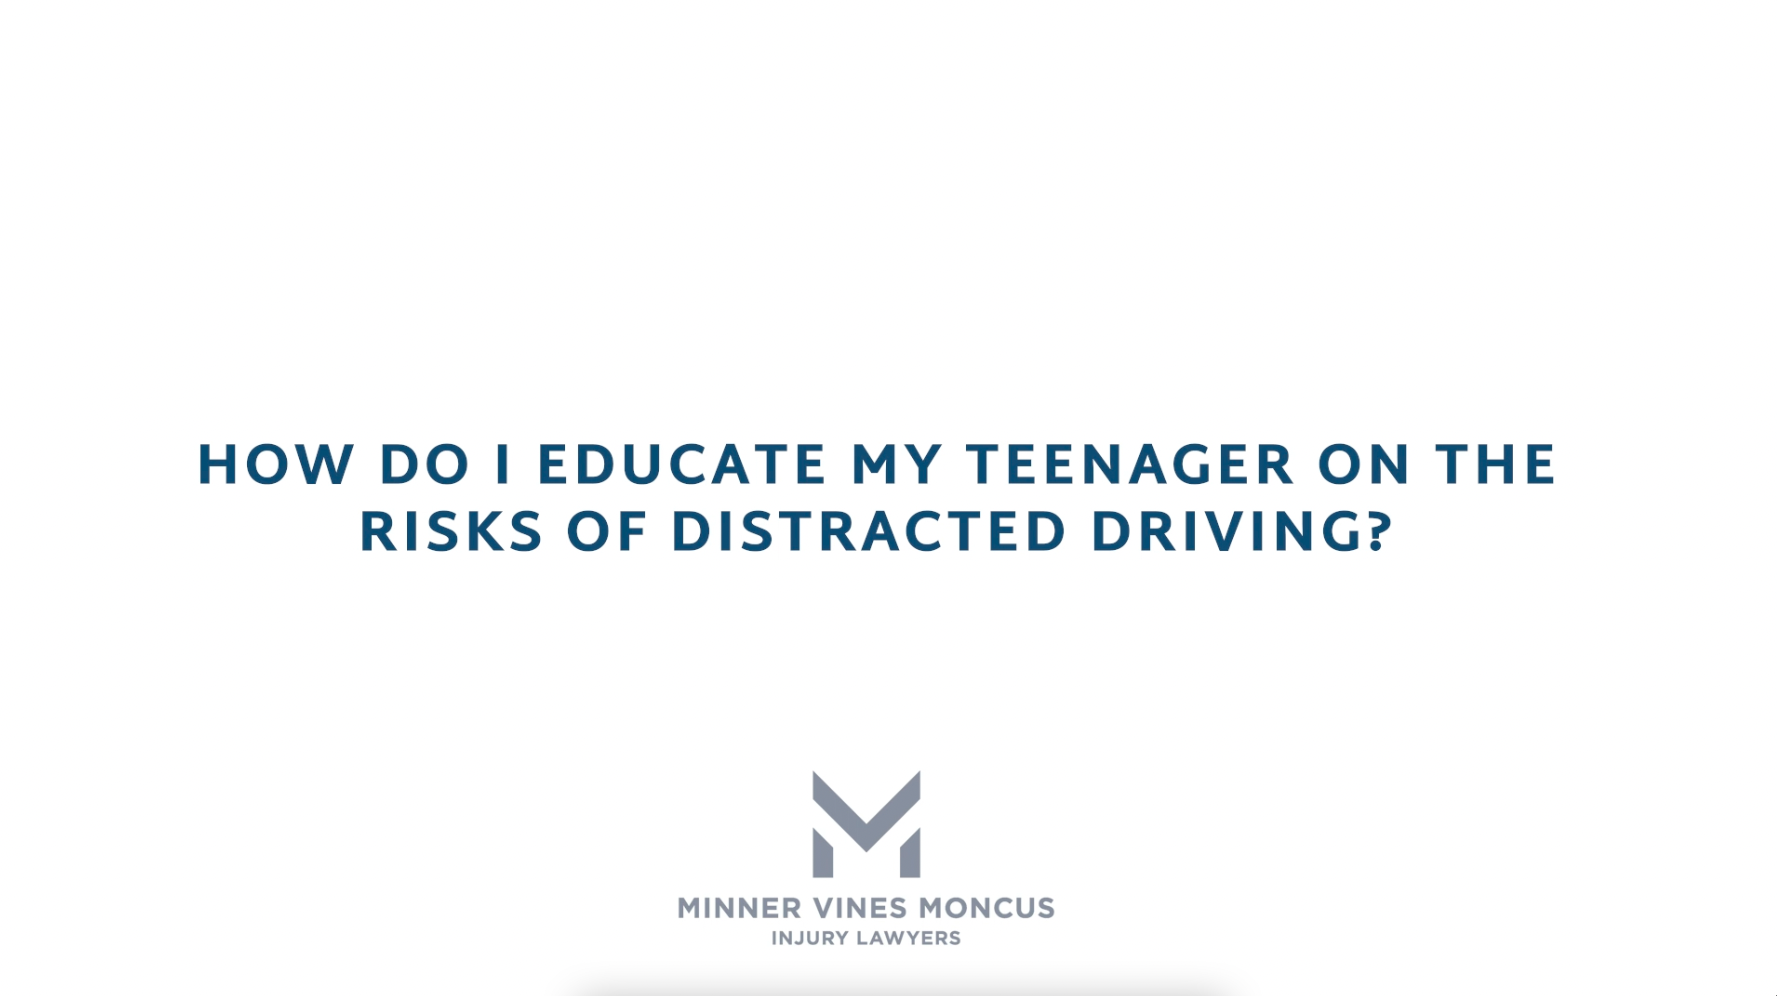 How do I educate my teenager on the risks of distracted driving?